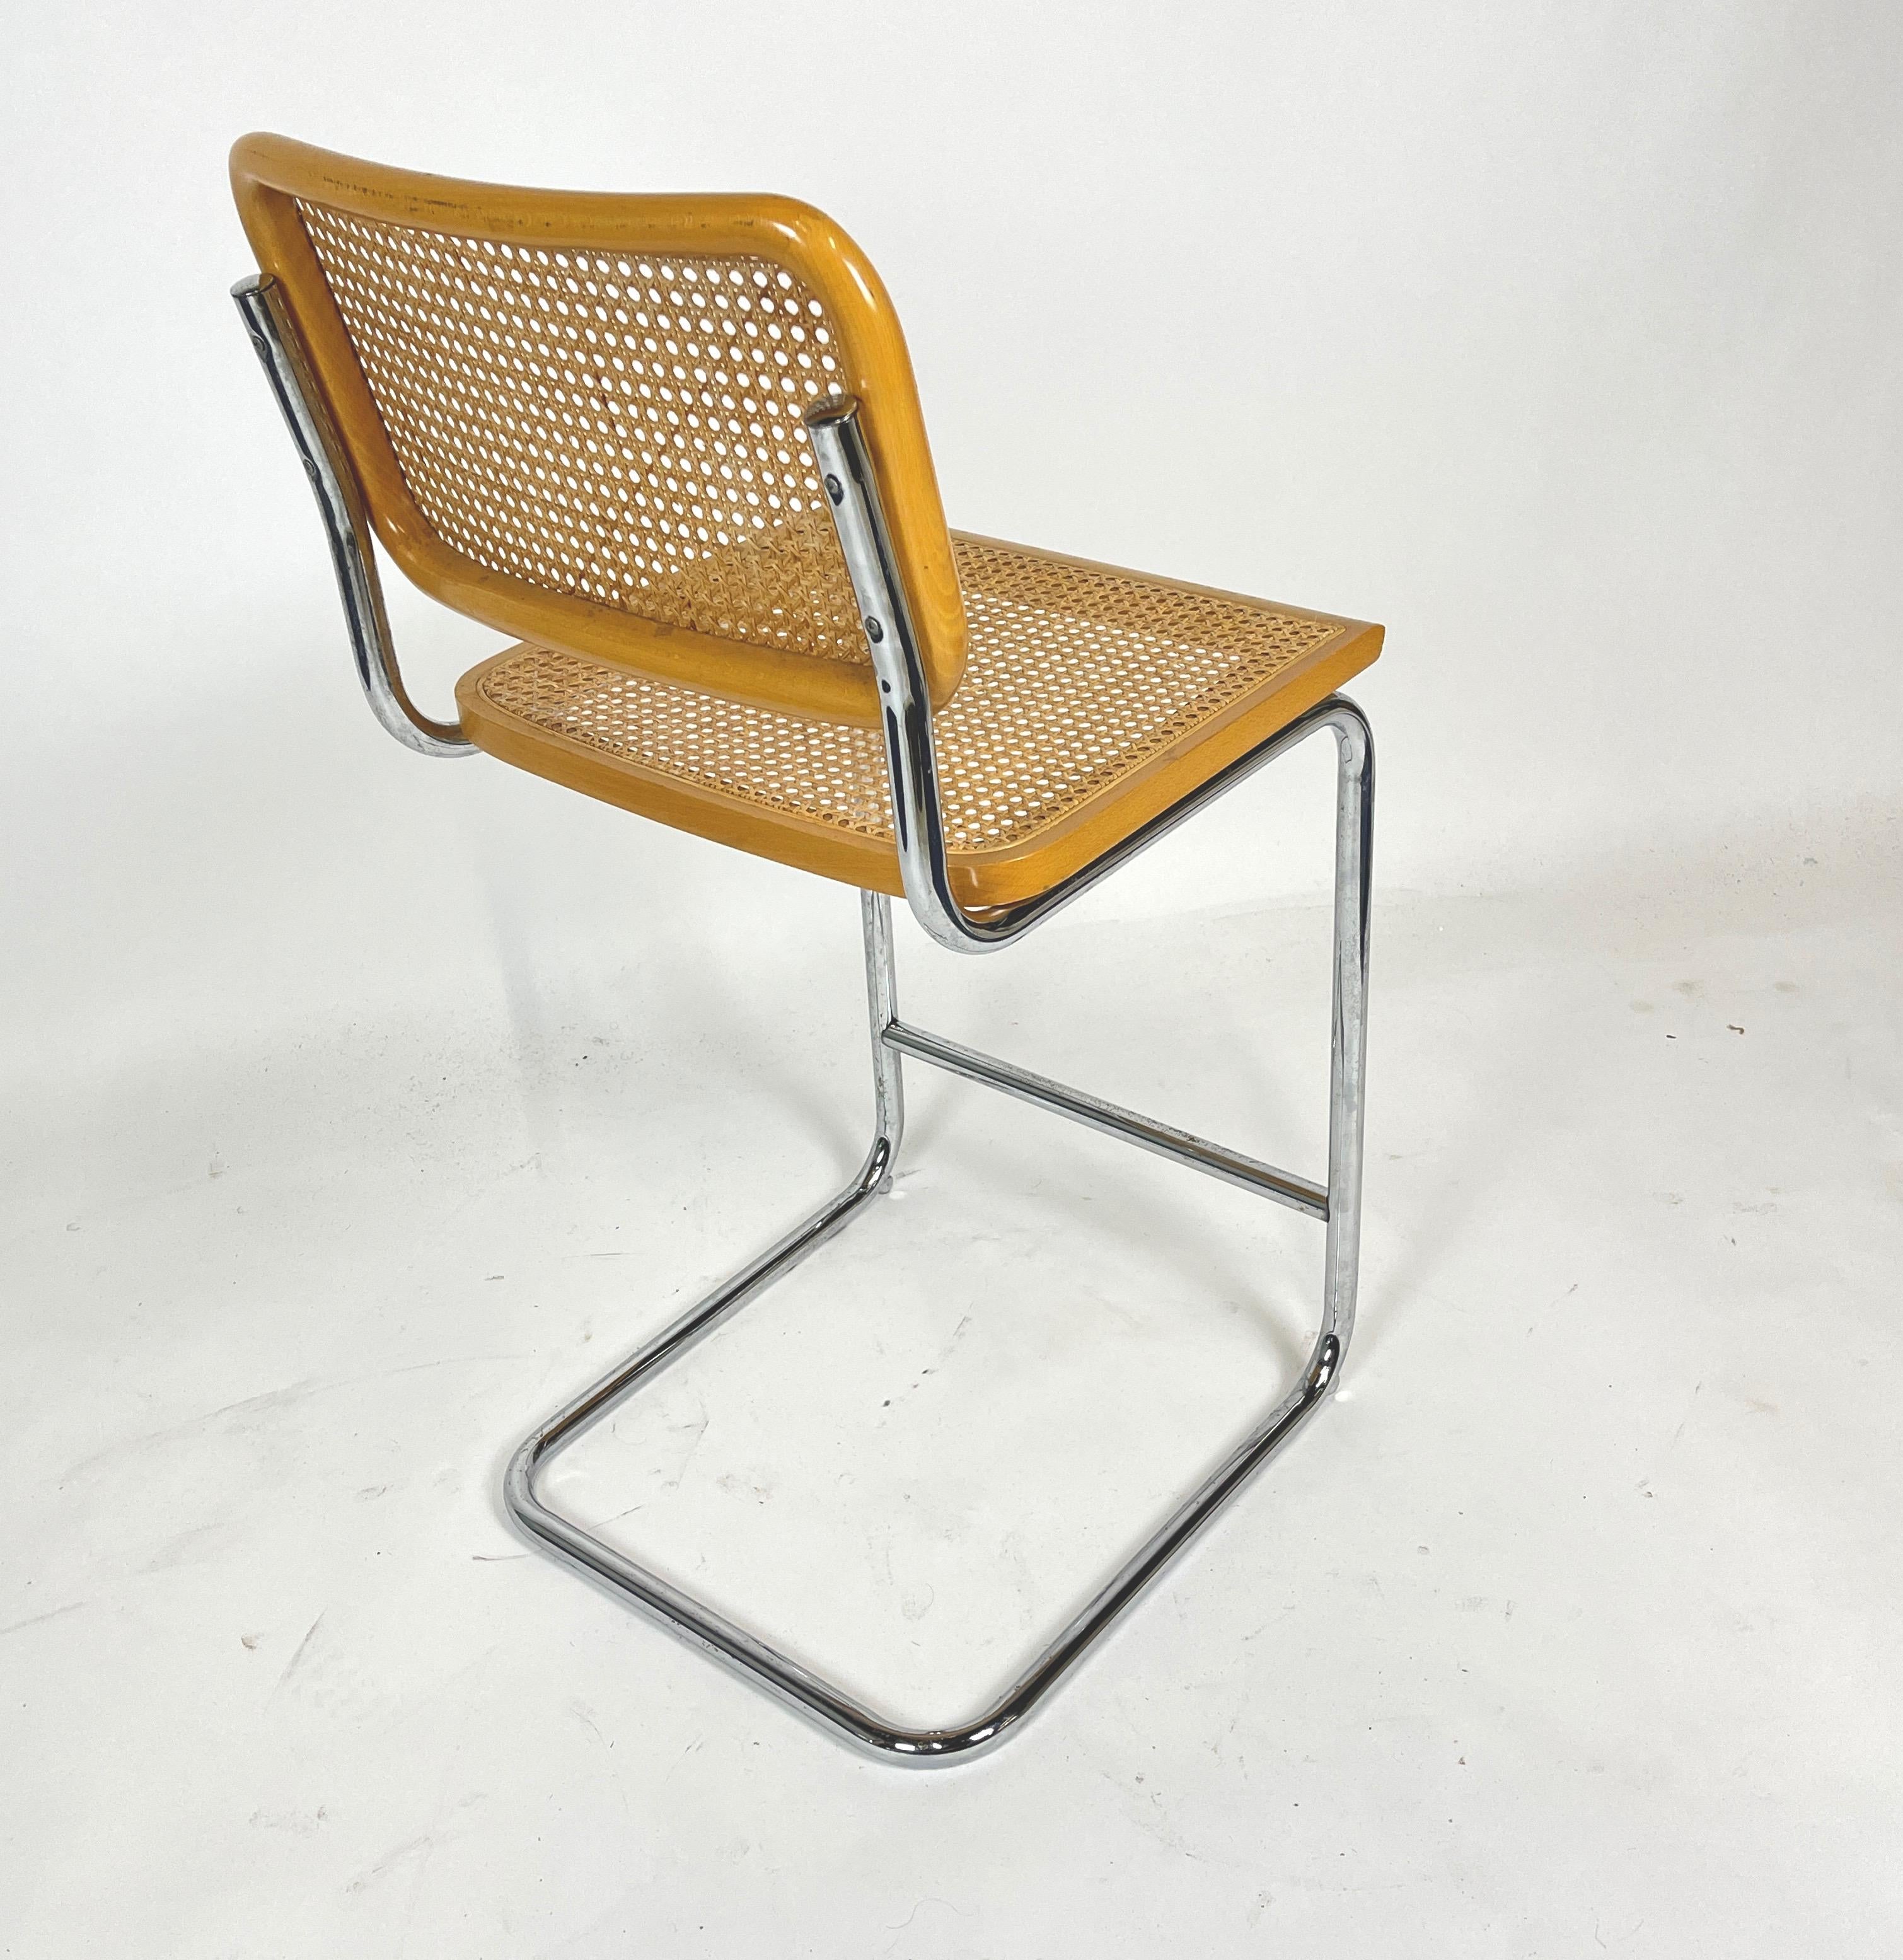 Late 20th Century Pair of Marcel Breuer Cane, Birch, and Chrome Cesca Stools Made in Italy